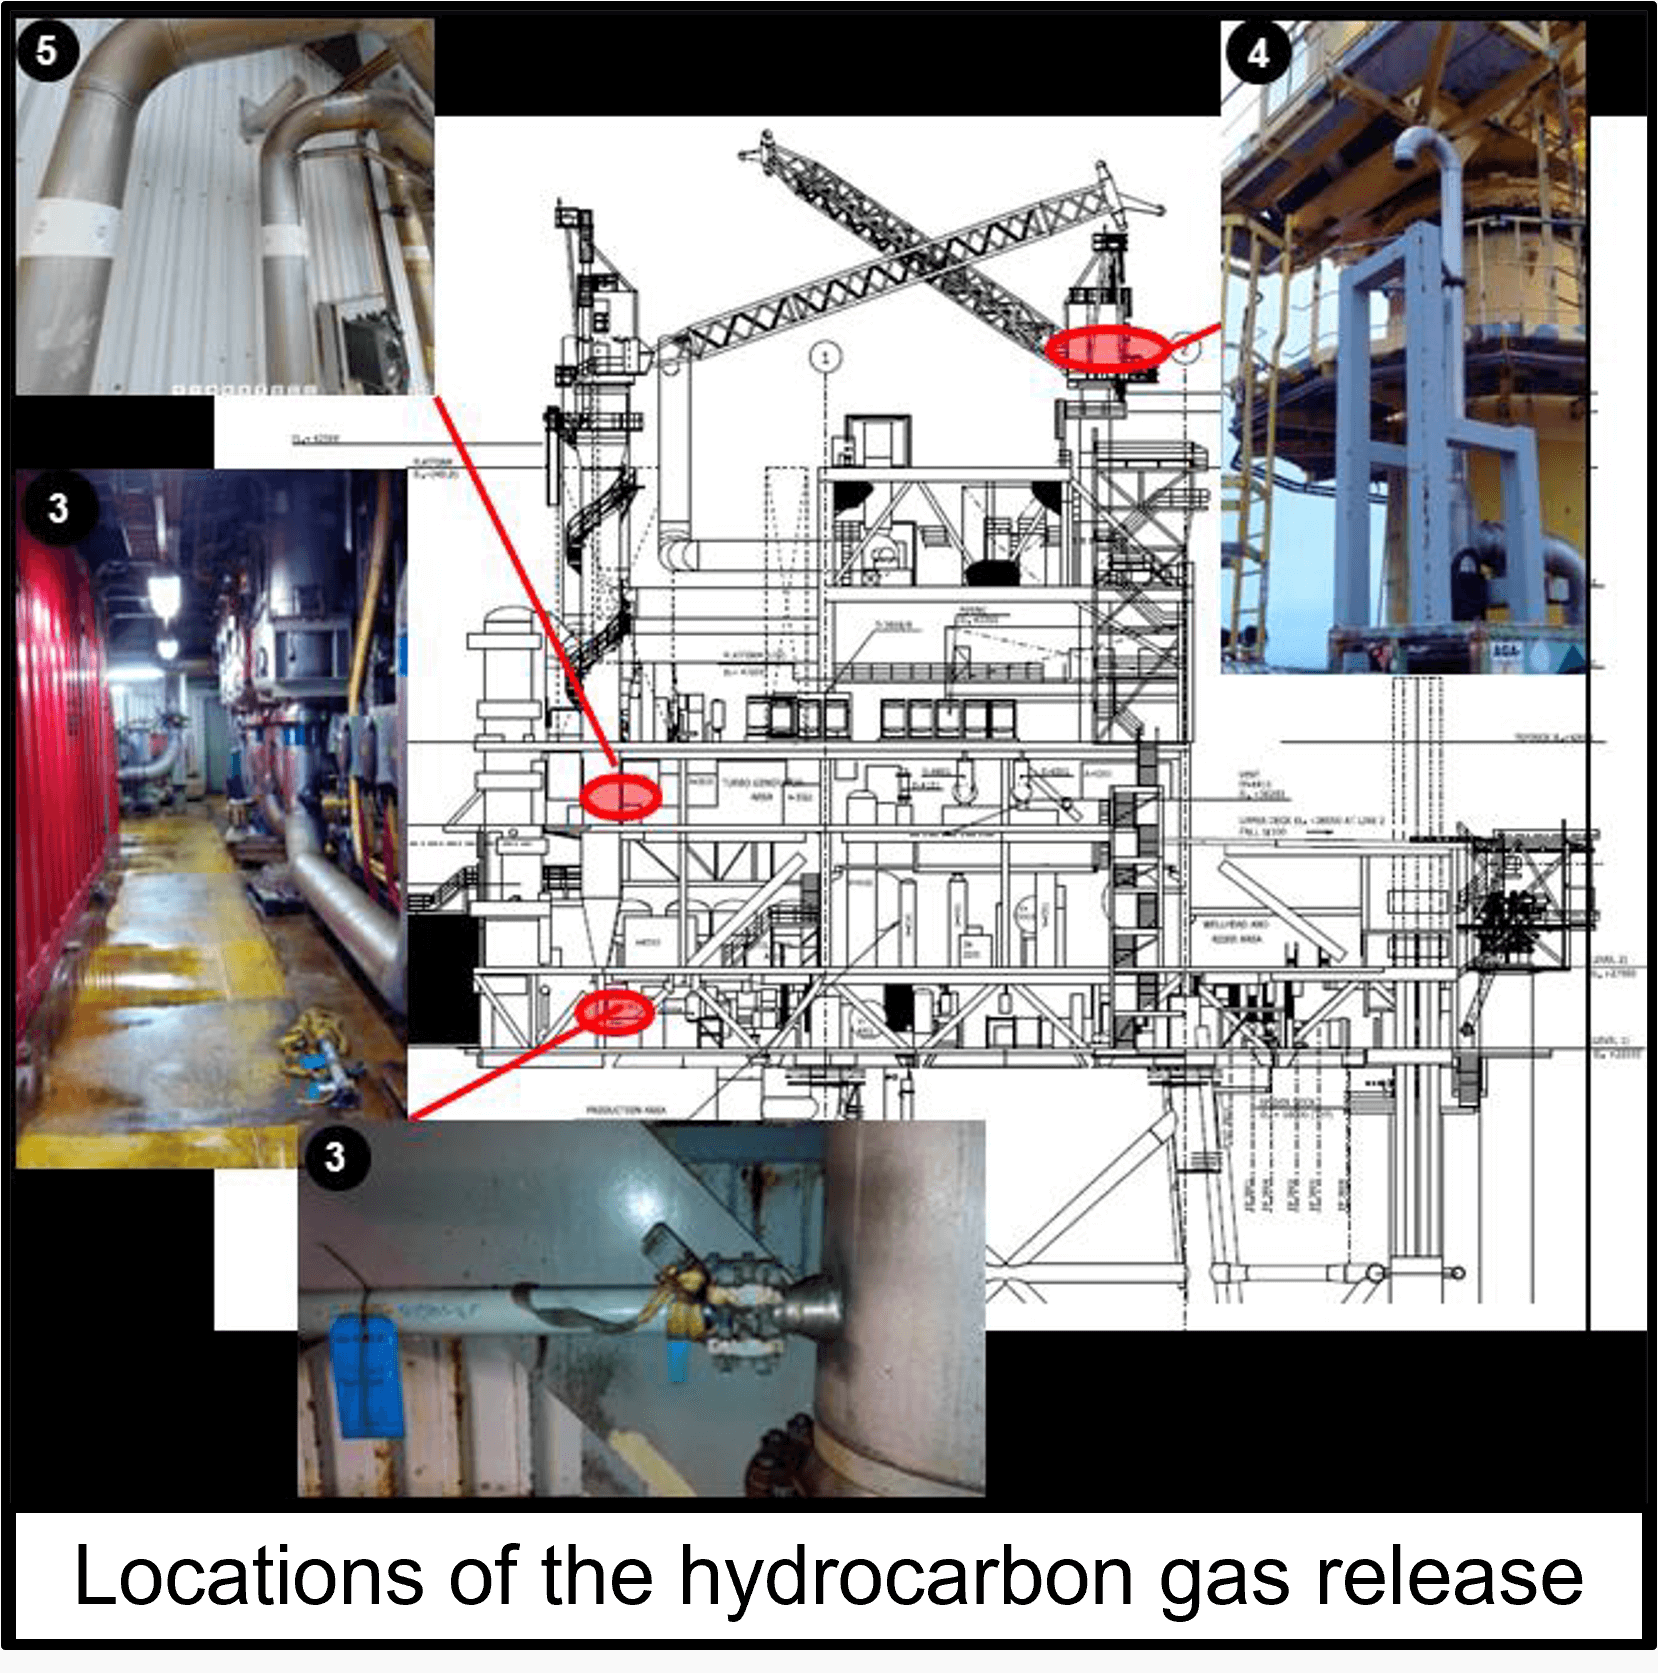 Locations of the hydrocarbon gas release